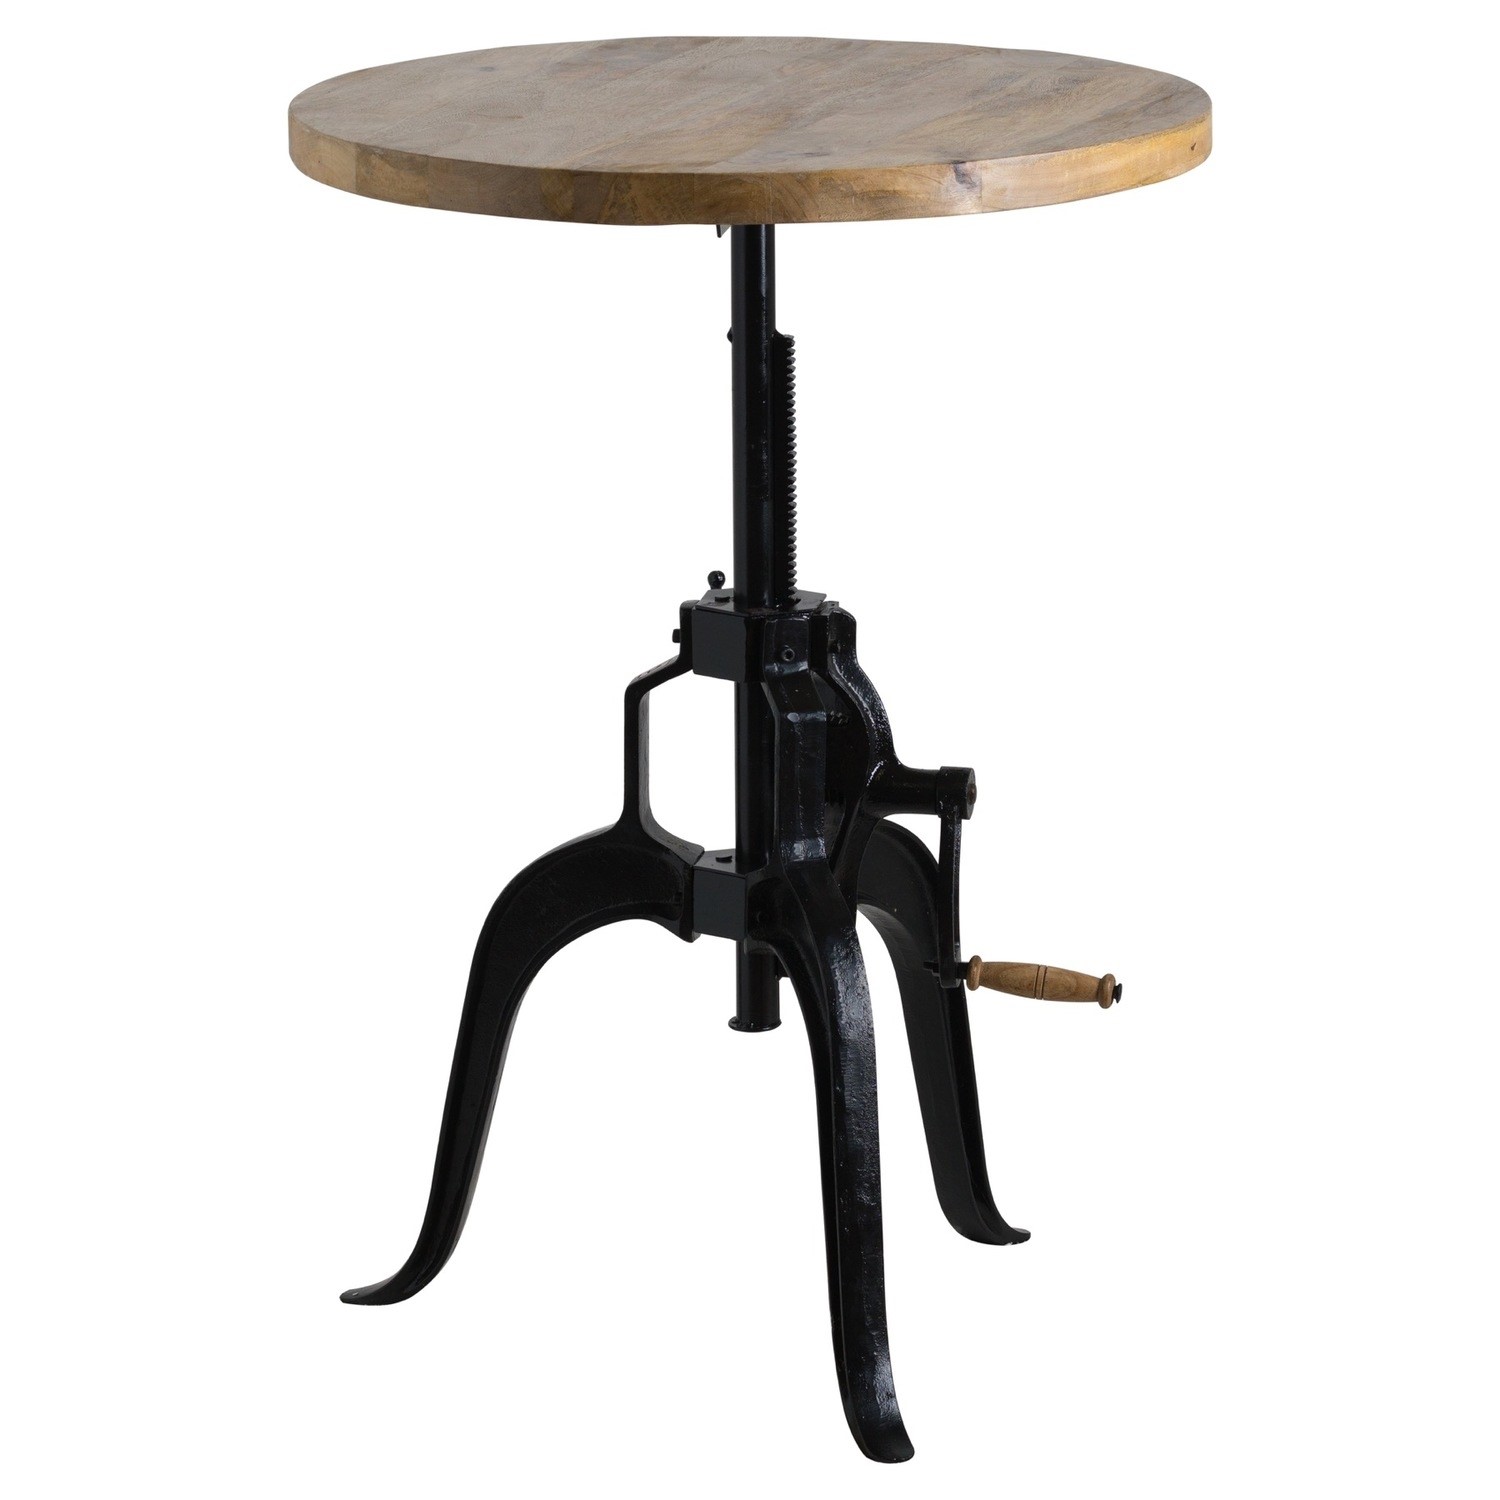 Read more about Round wooden adjustable bar table draftsman